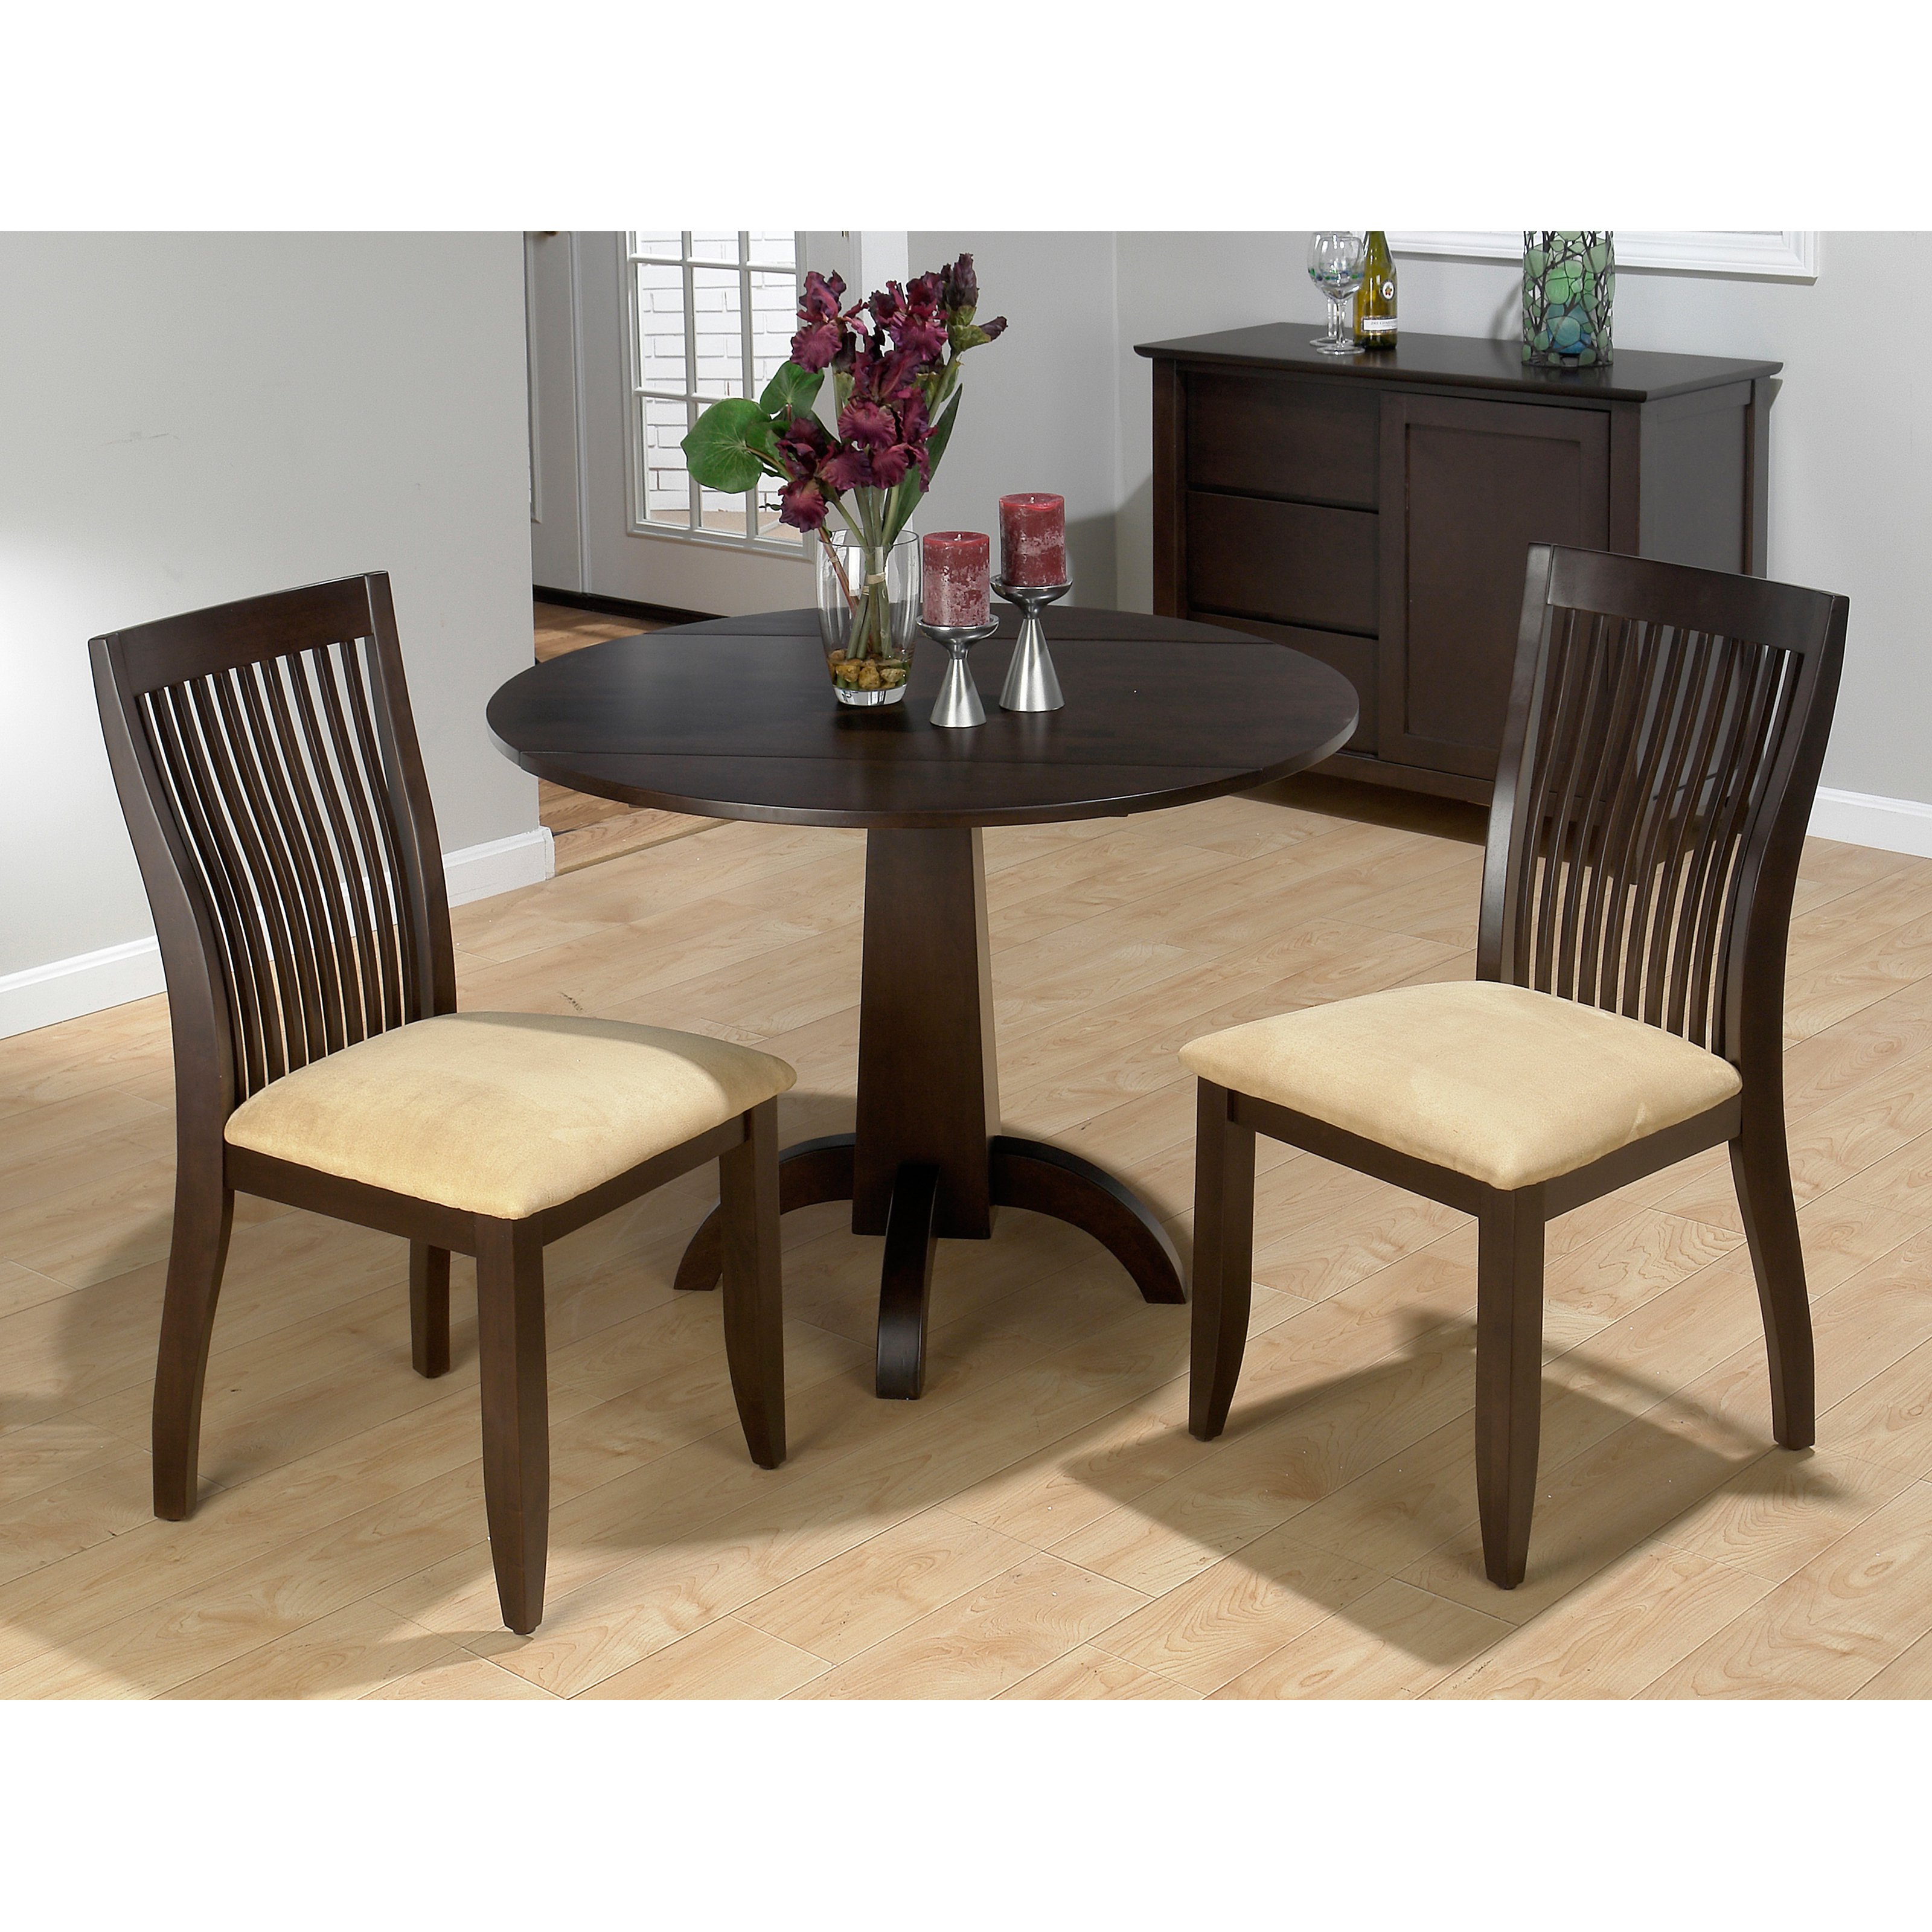 designs dining set decor argos tures table small and round white ideas compact for dimensions chairs furniture room seater sets drop leaf accent full size metal folding patio